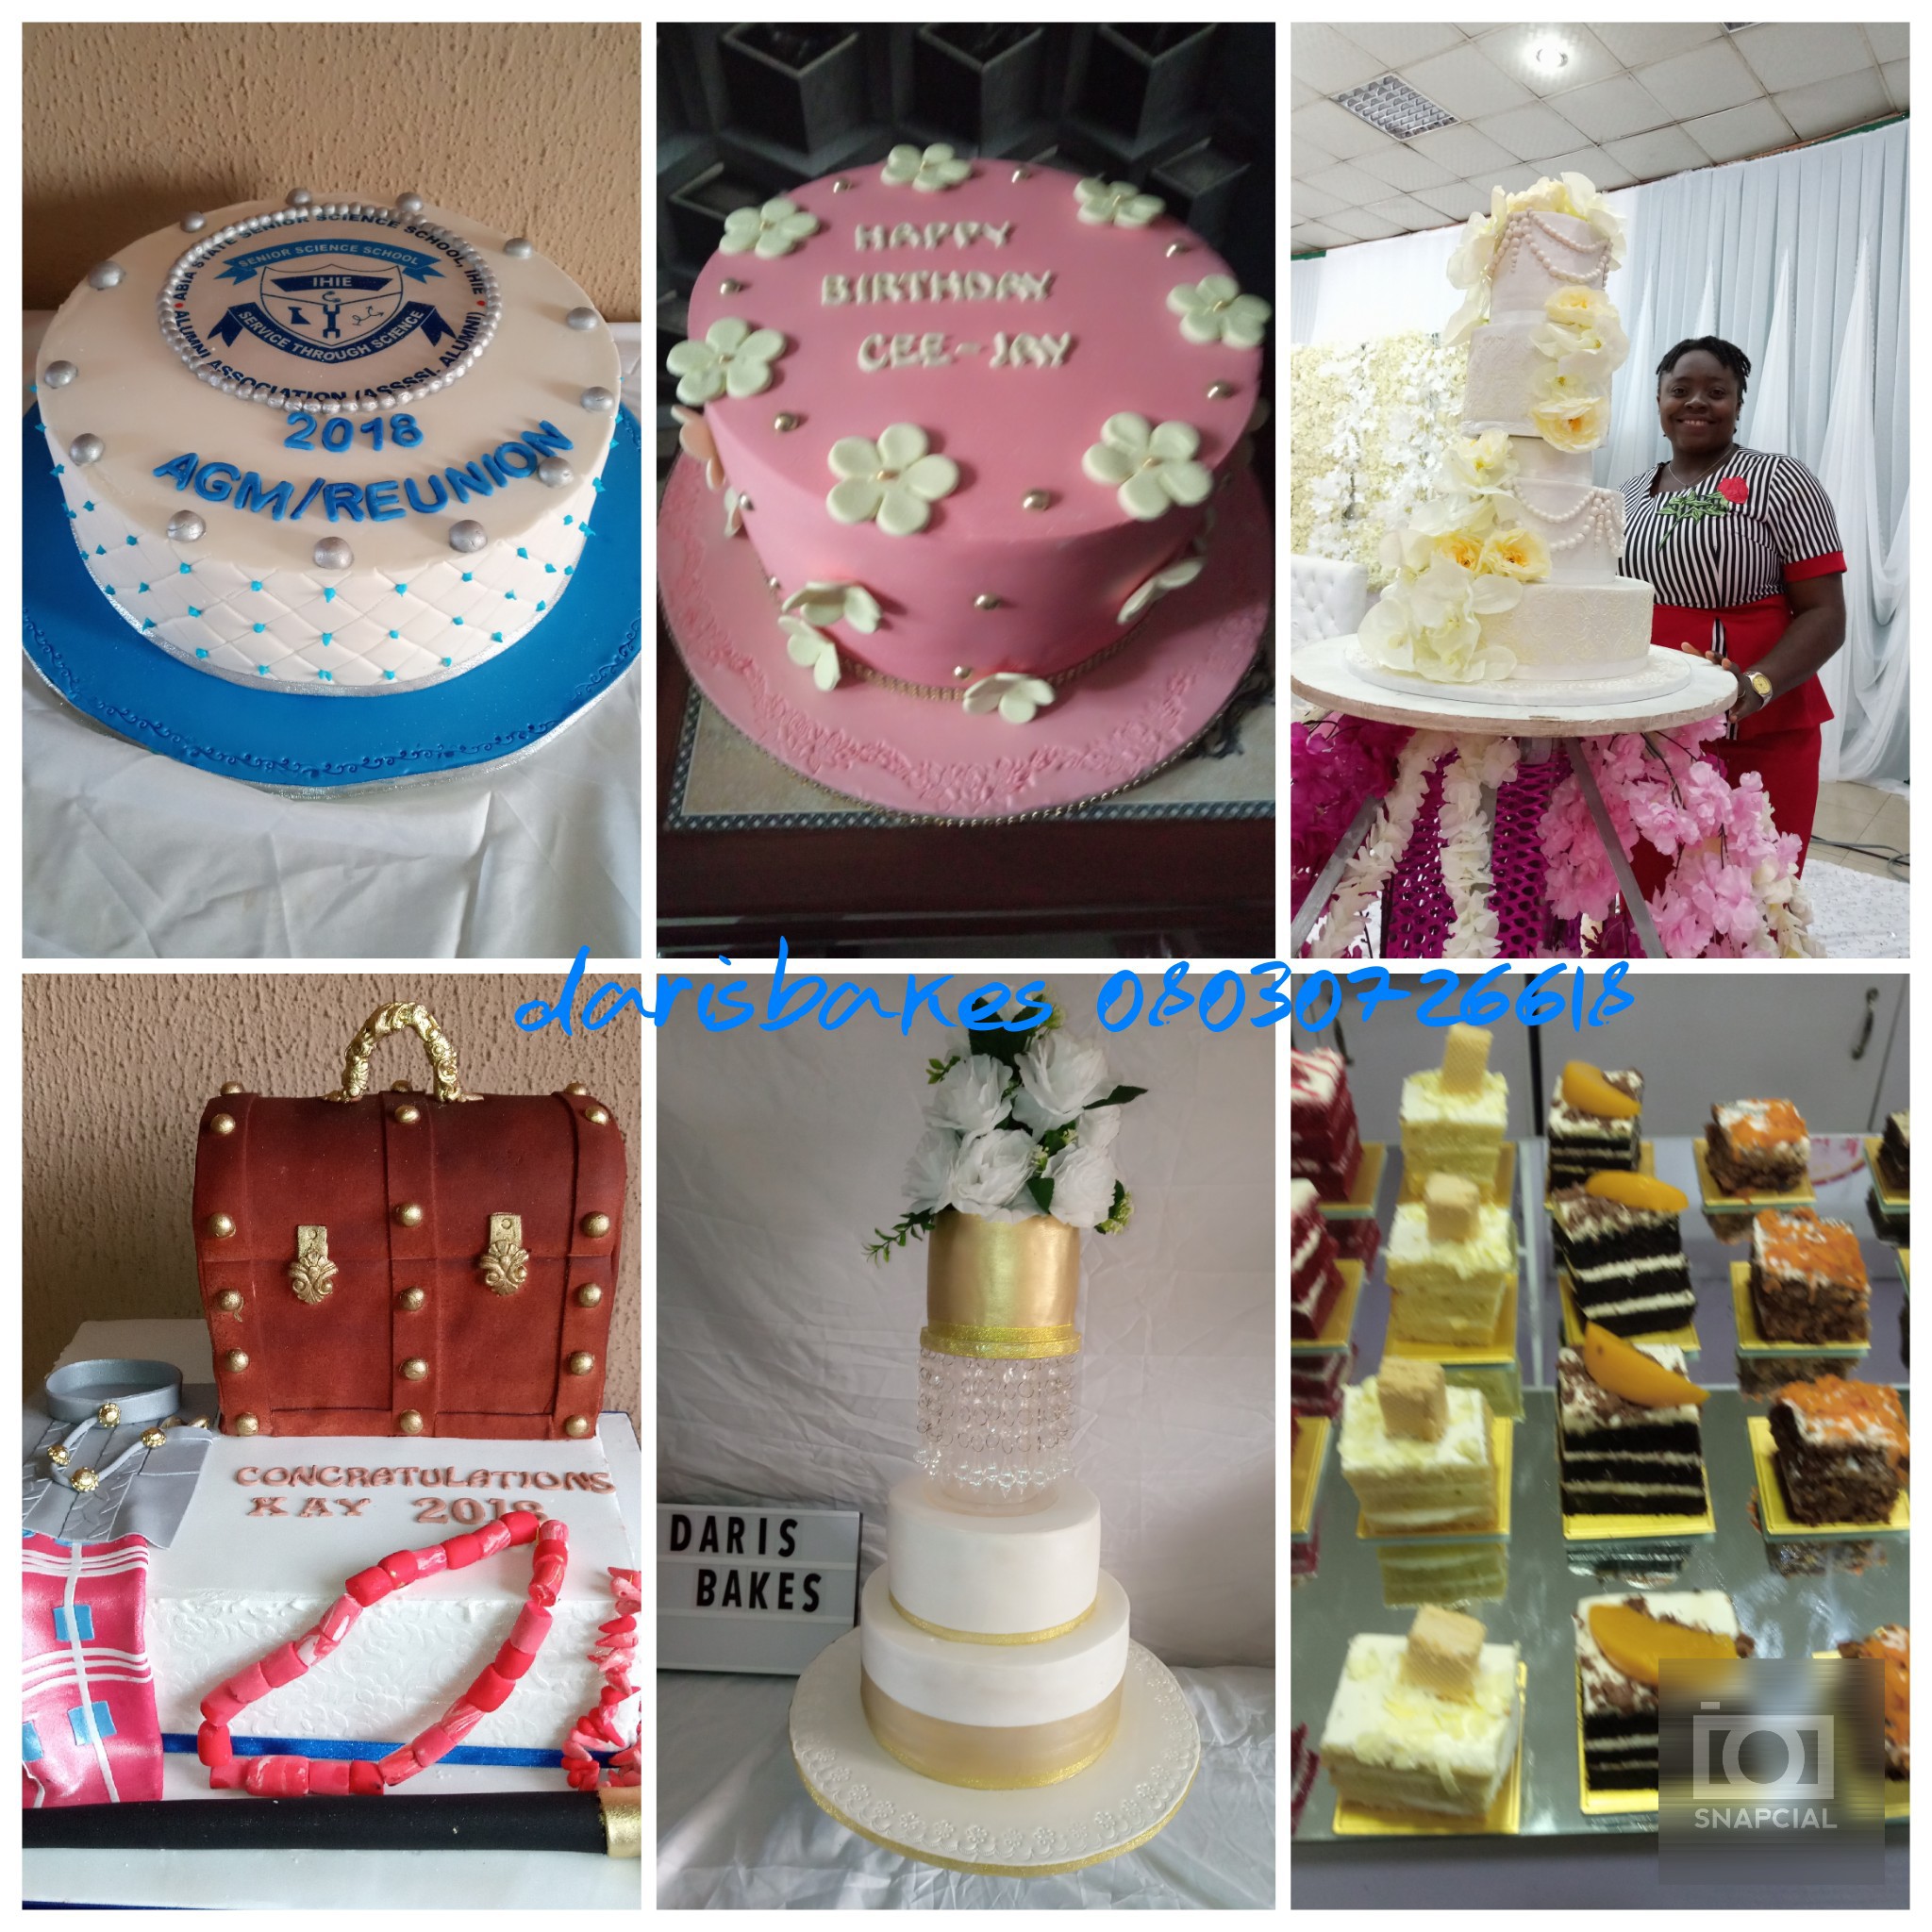 Daris Bakes &Events picture